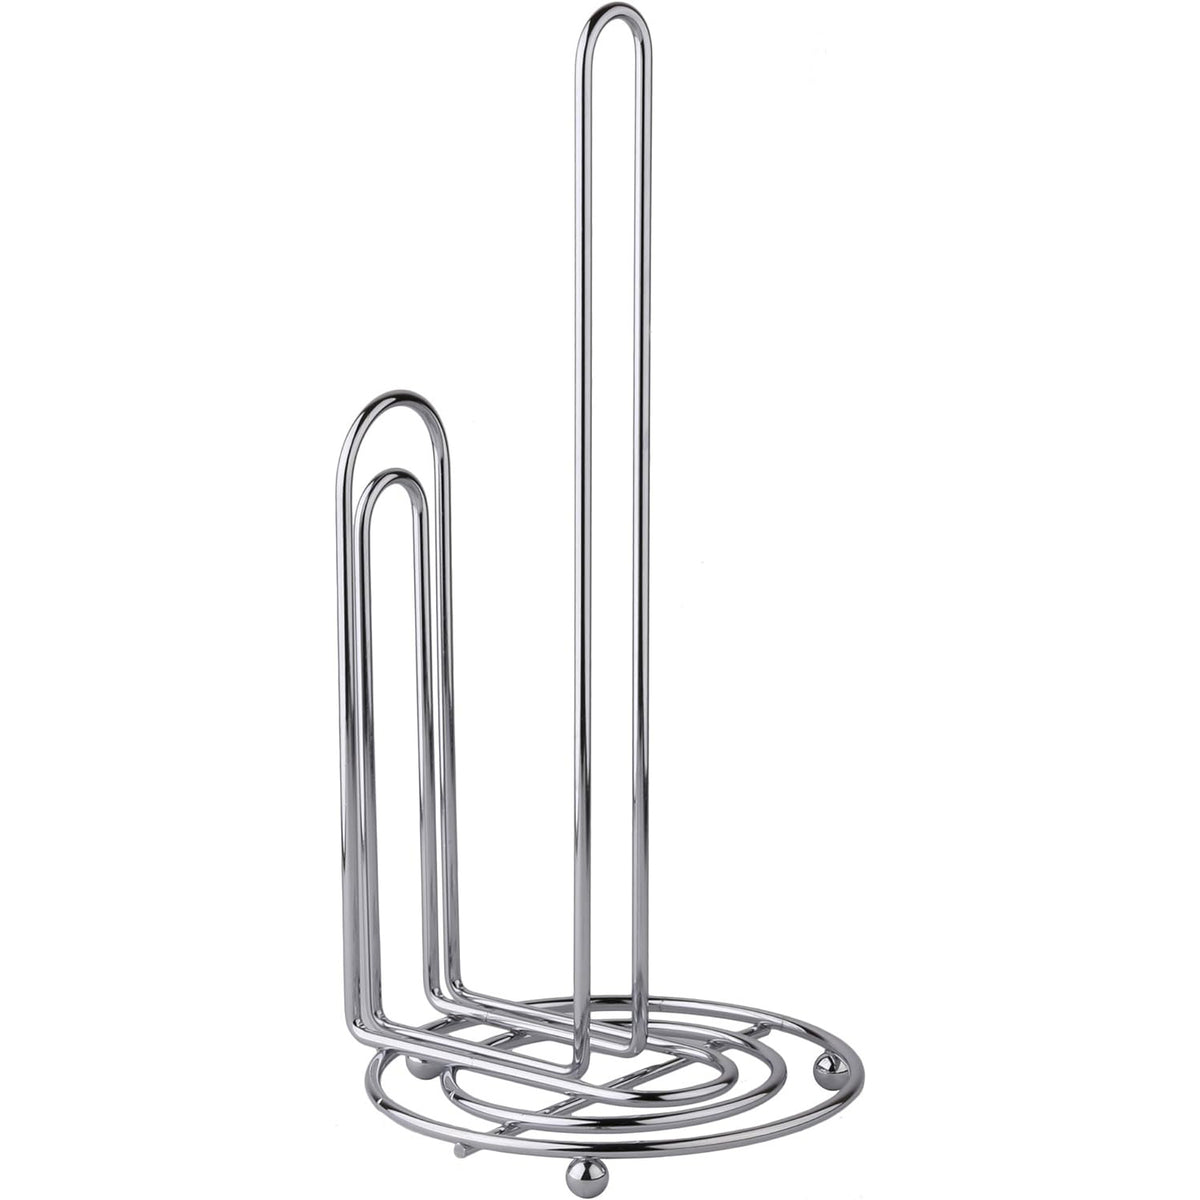 Chrome Finish Paper Towel Holder - For Countertop, Sink And Under Cabinets